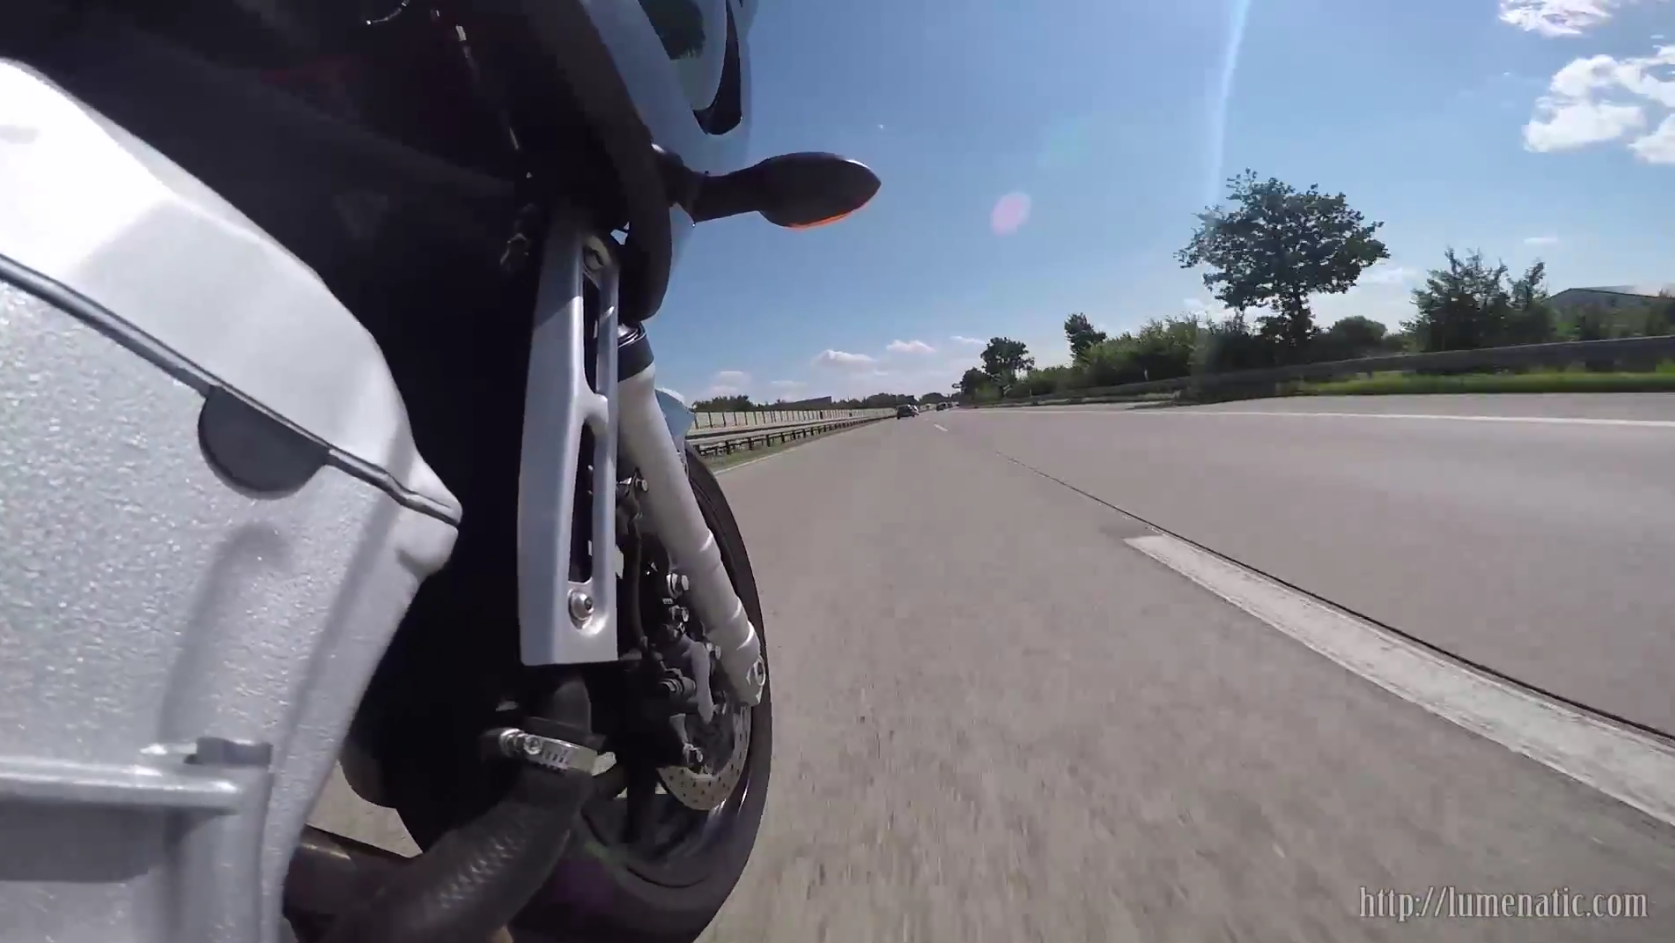 Nine ways to position a GoPro on a motorcycle